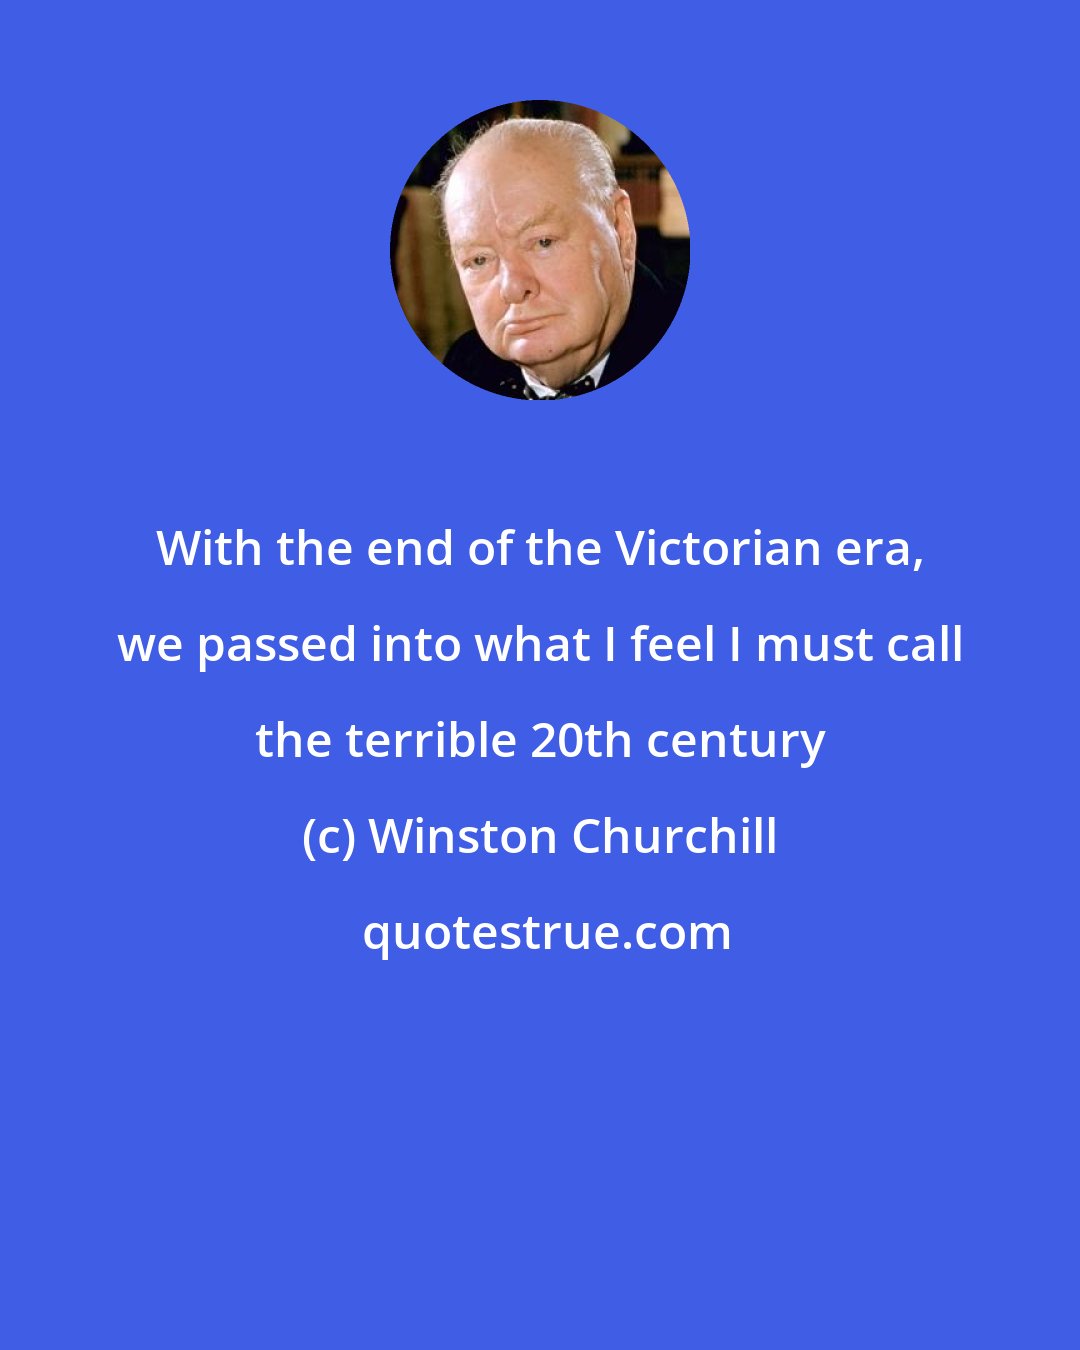 Winston Churchill: With the end of the Victorian era, we passed into what I feel I must call the terrible 20th century